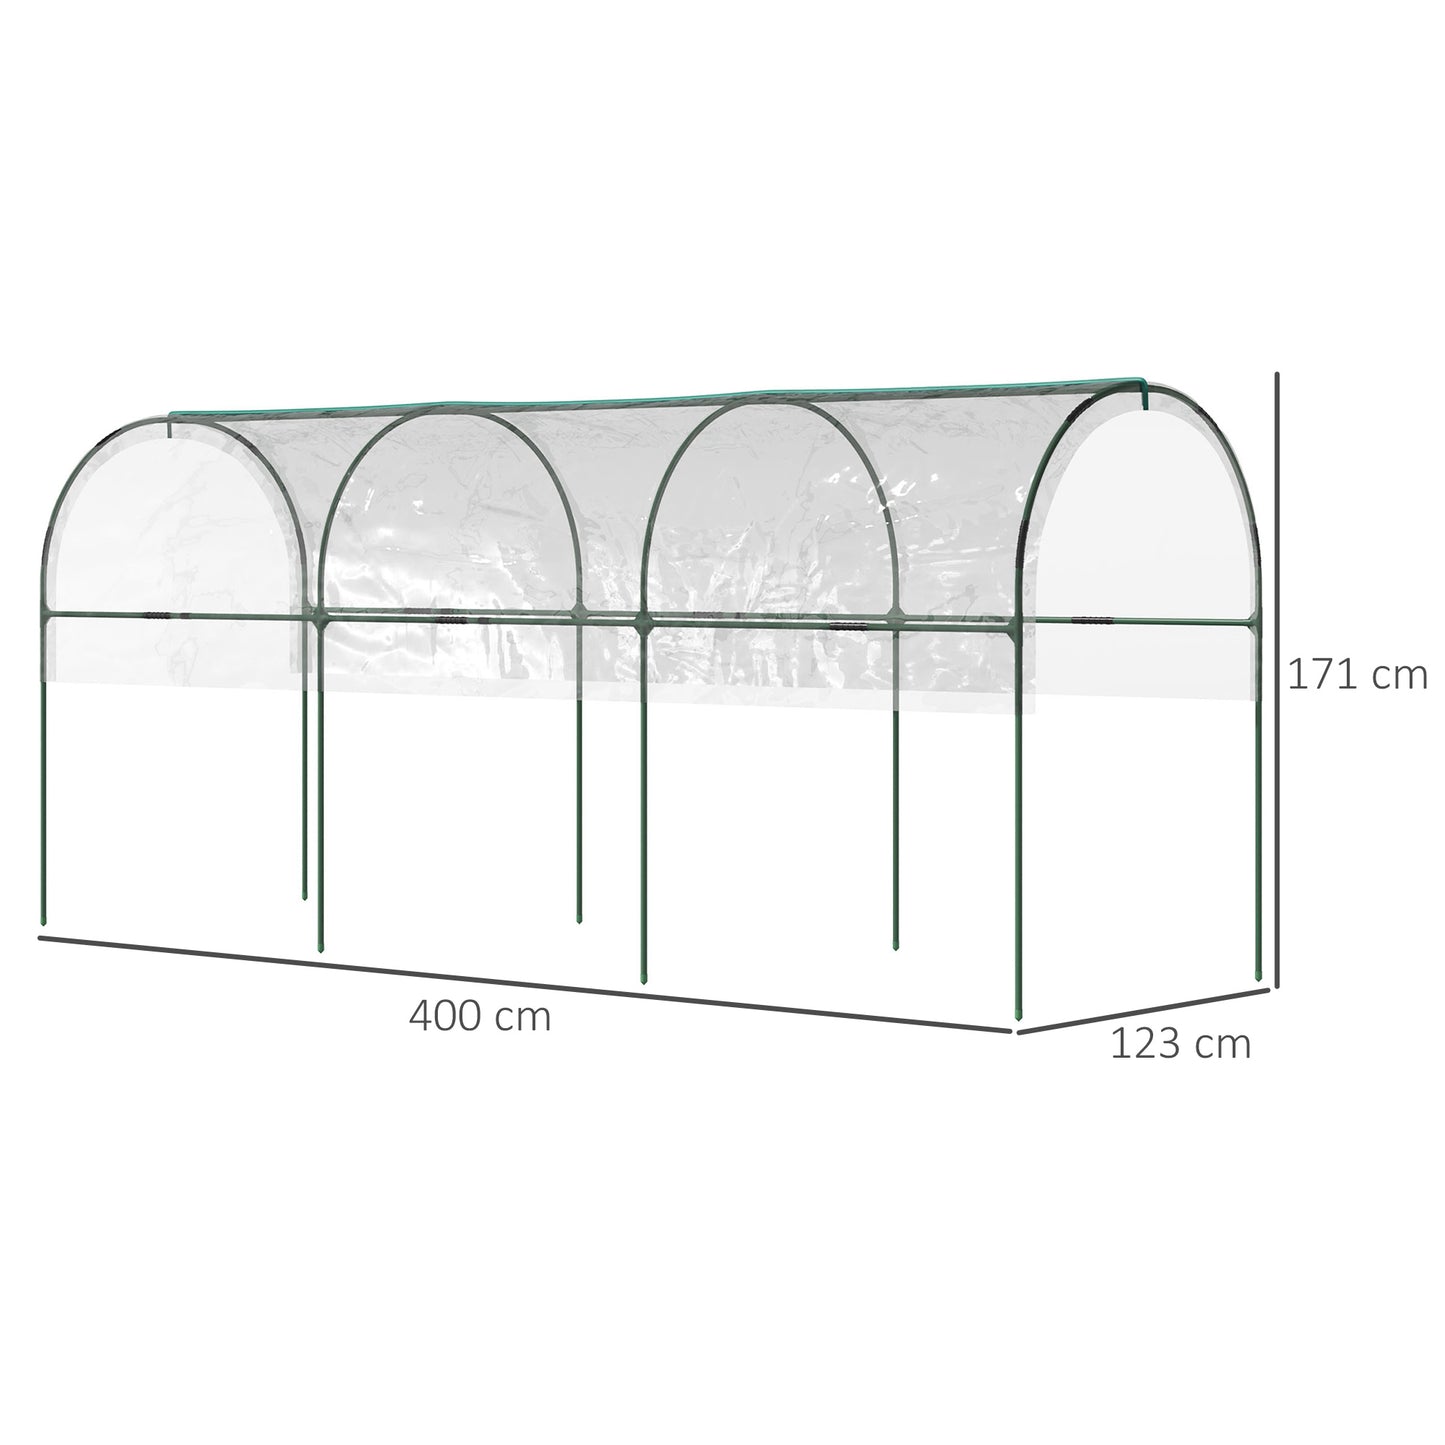 Outsunny Tunnel Tomato Greenhouse with 4 Hoops and Top Tap, Pointed Bottom and Guy Ropes, Clear